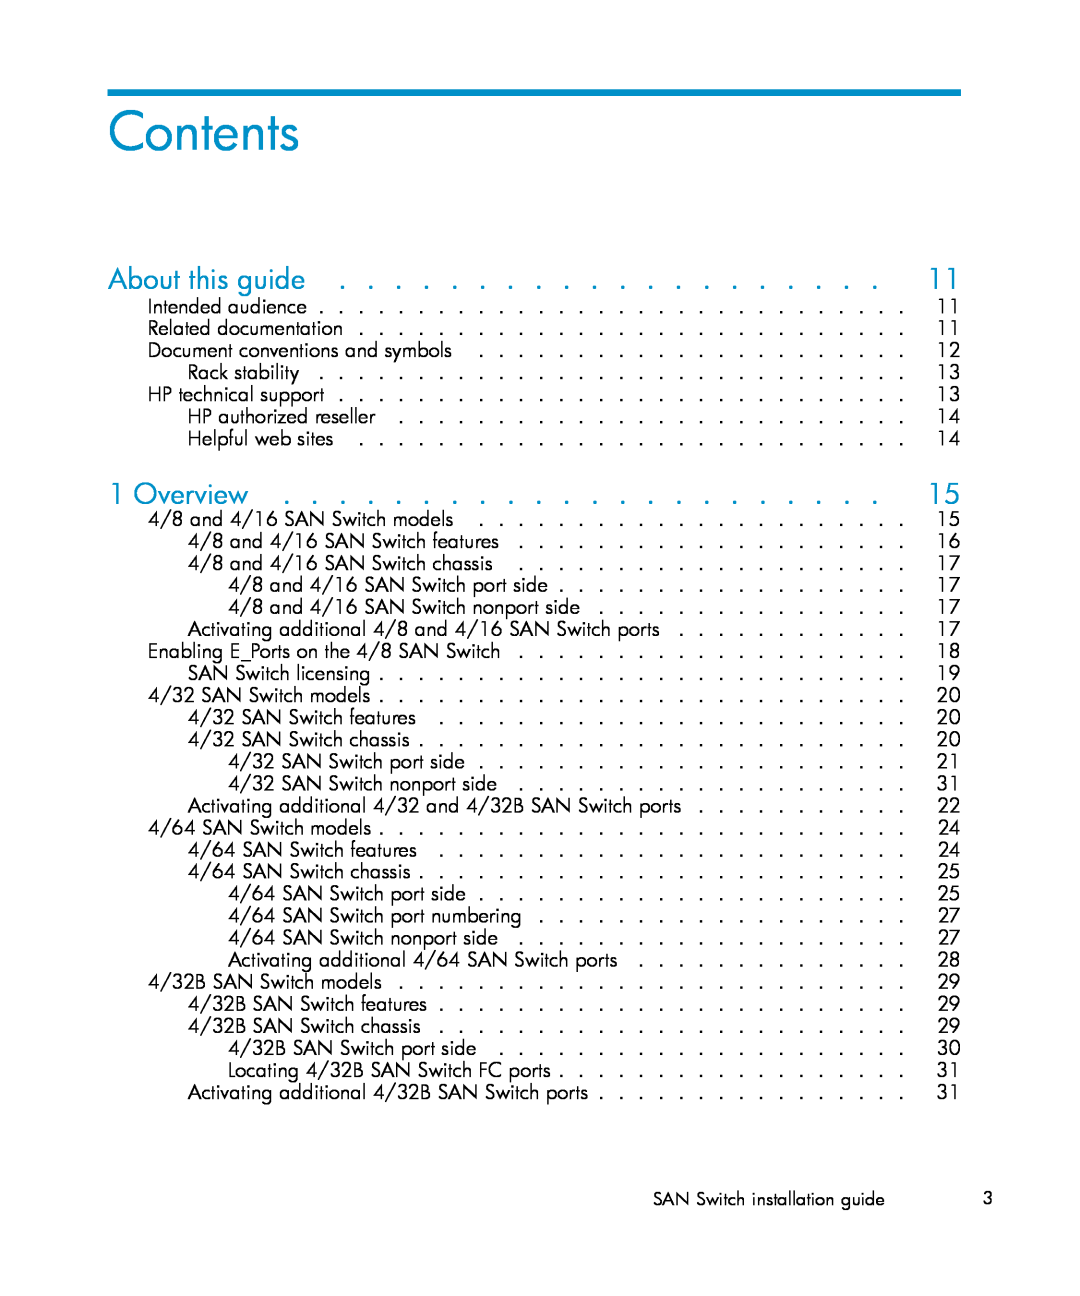 IBM AA-RWF3A-TE manual Contents, About this guide, Overview 